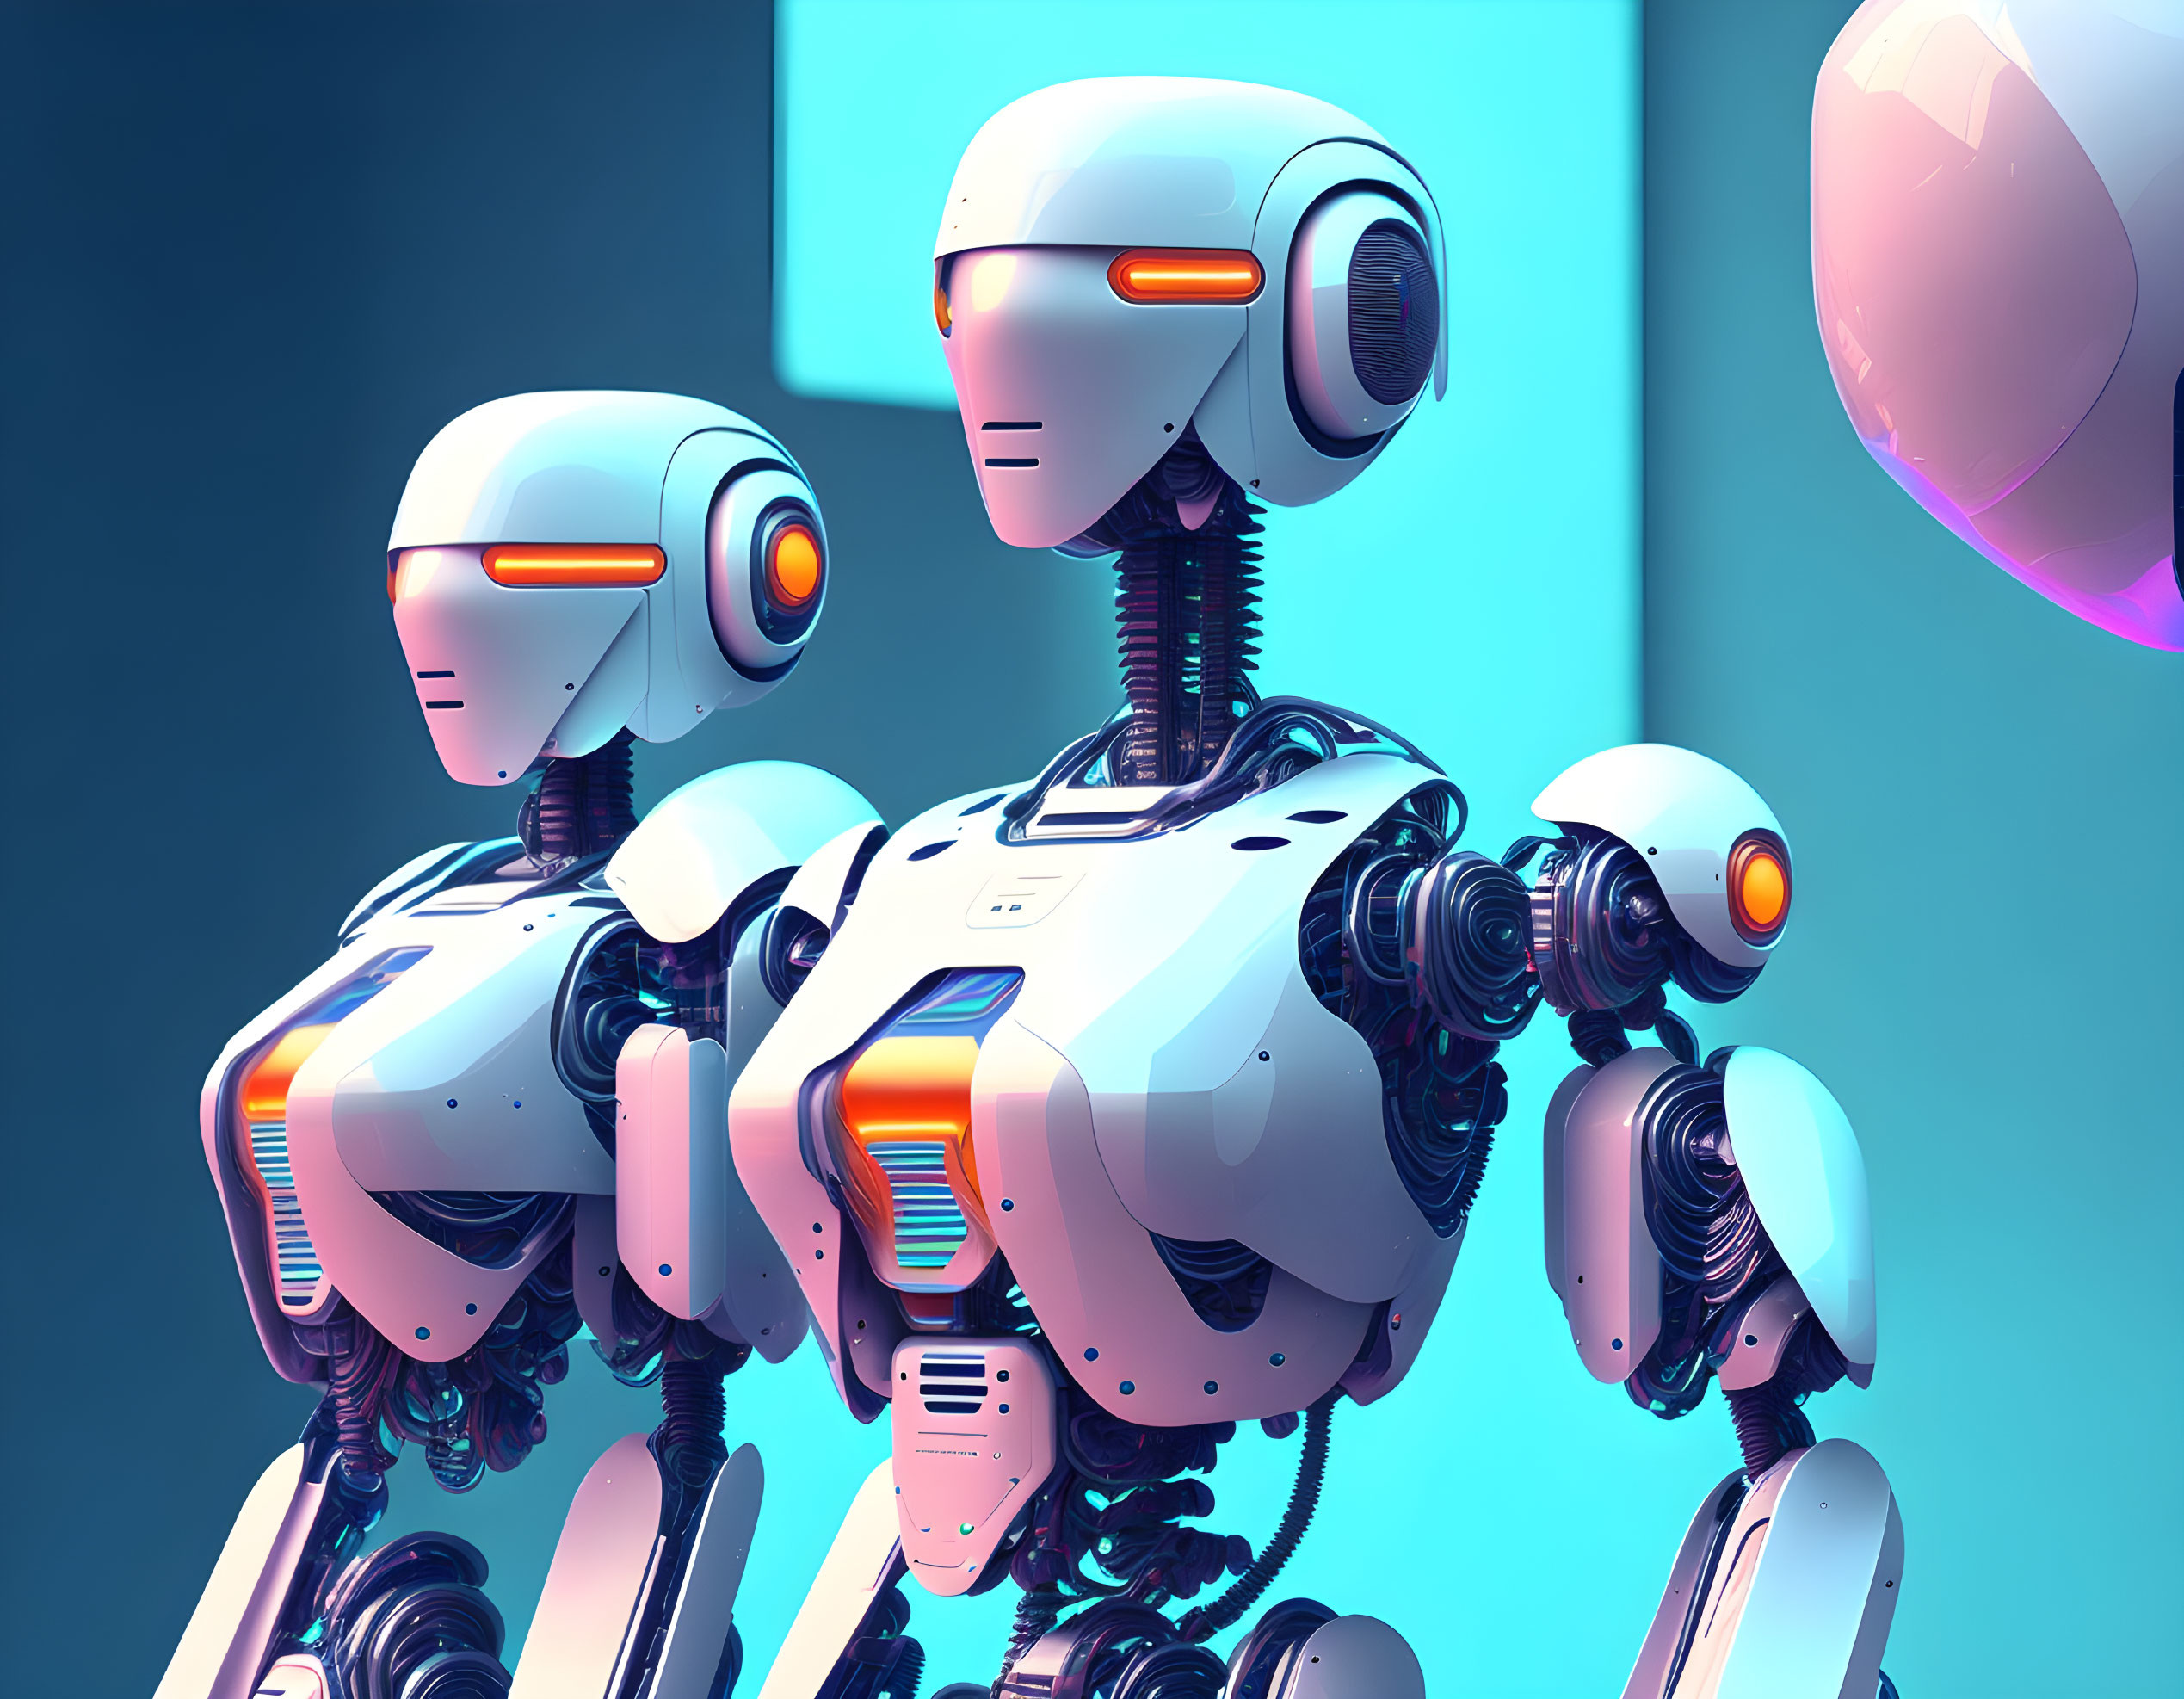 Futuristic humanoid robots with white and orange accents on blue background